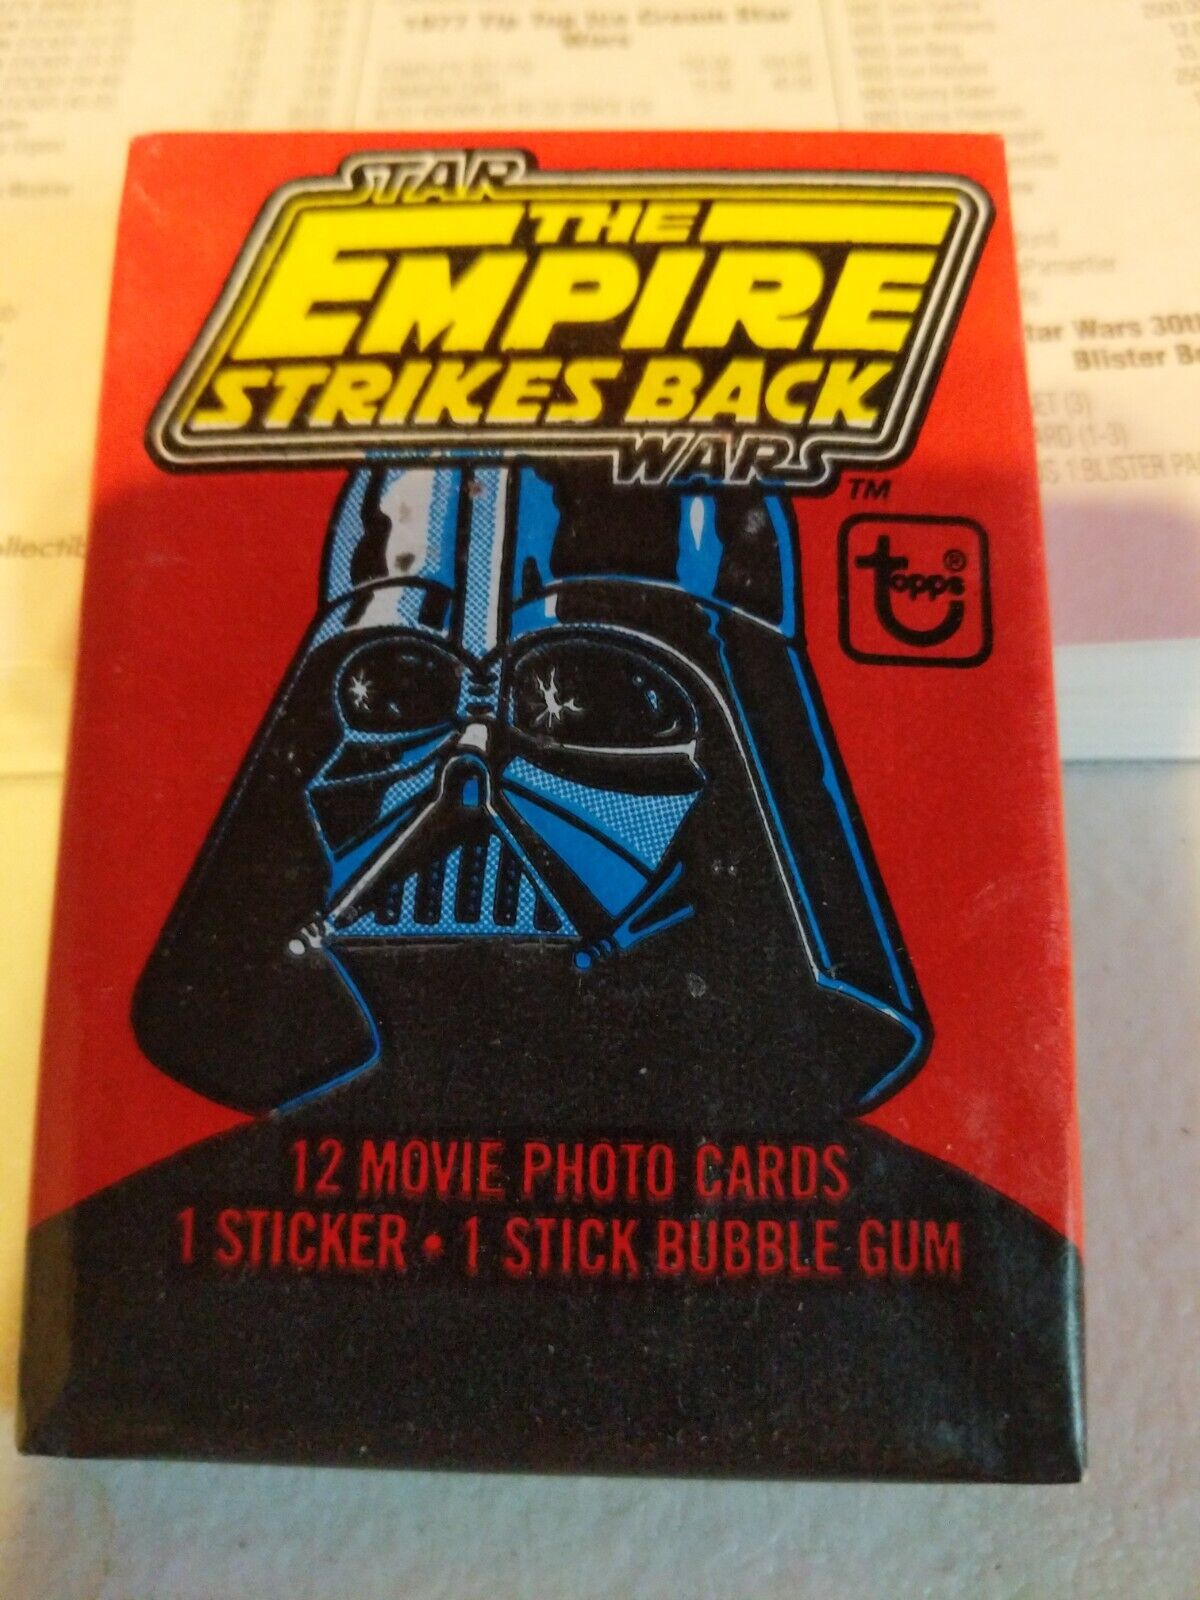 Topps 1980 Star Wars The Empire Strikes Back series 1 sealed wax pack EX/NM 